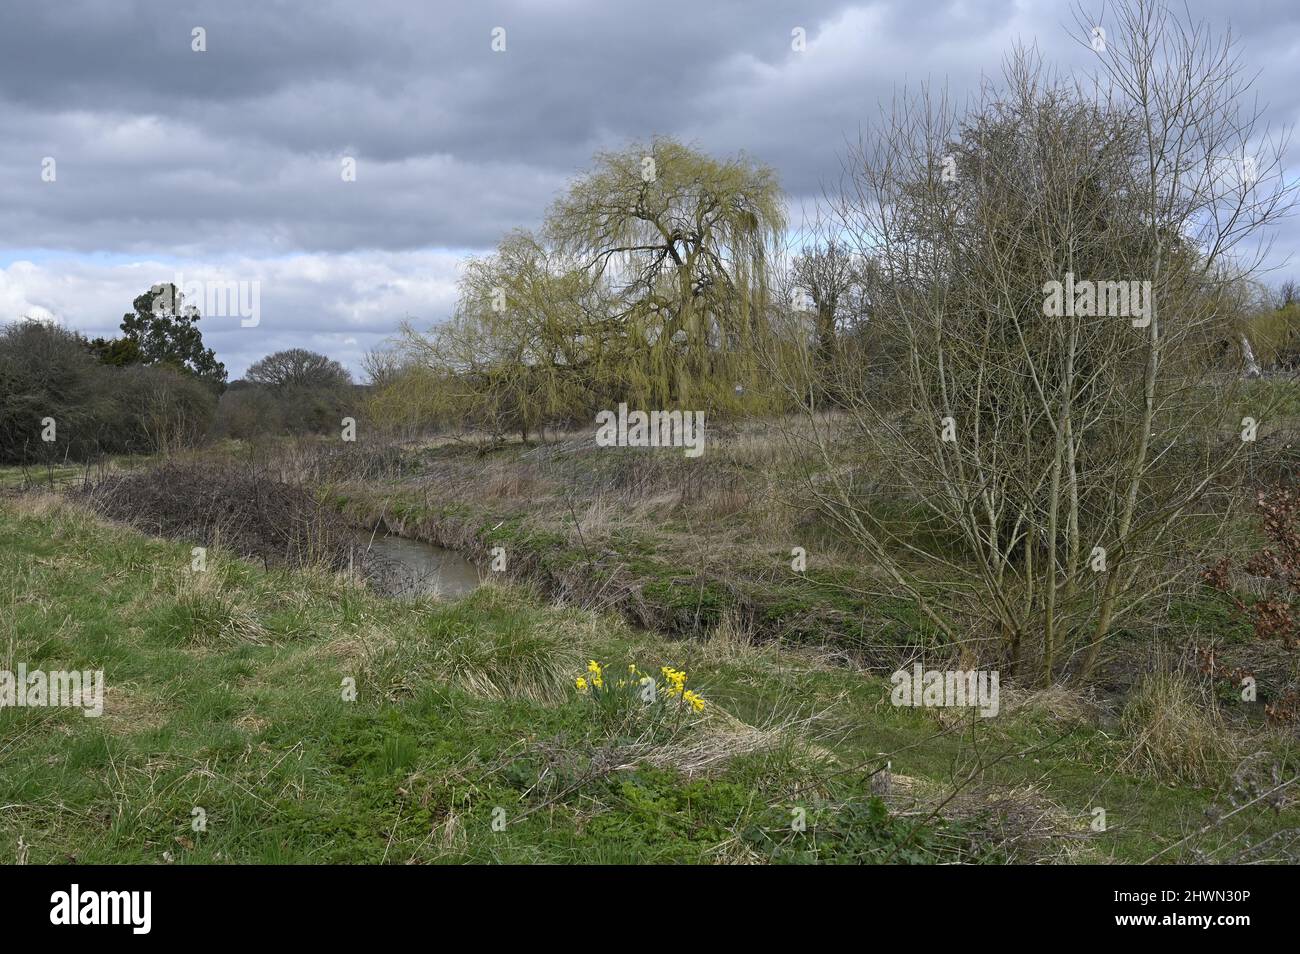 The River Crouch near the London Road Bridge at Wickford in Essex.  This is a conservation area managed by Basildon Council.  No fishing. Stock Photo